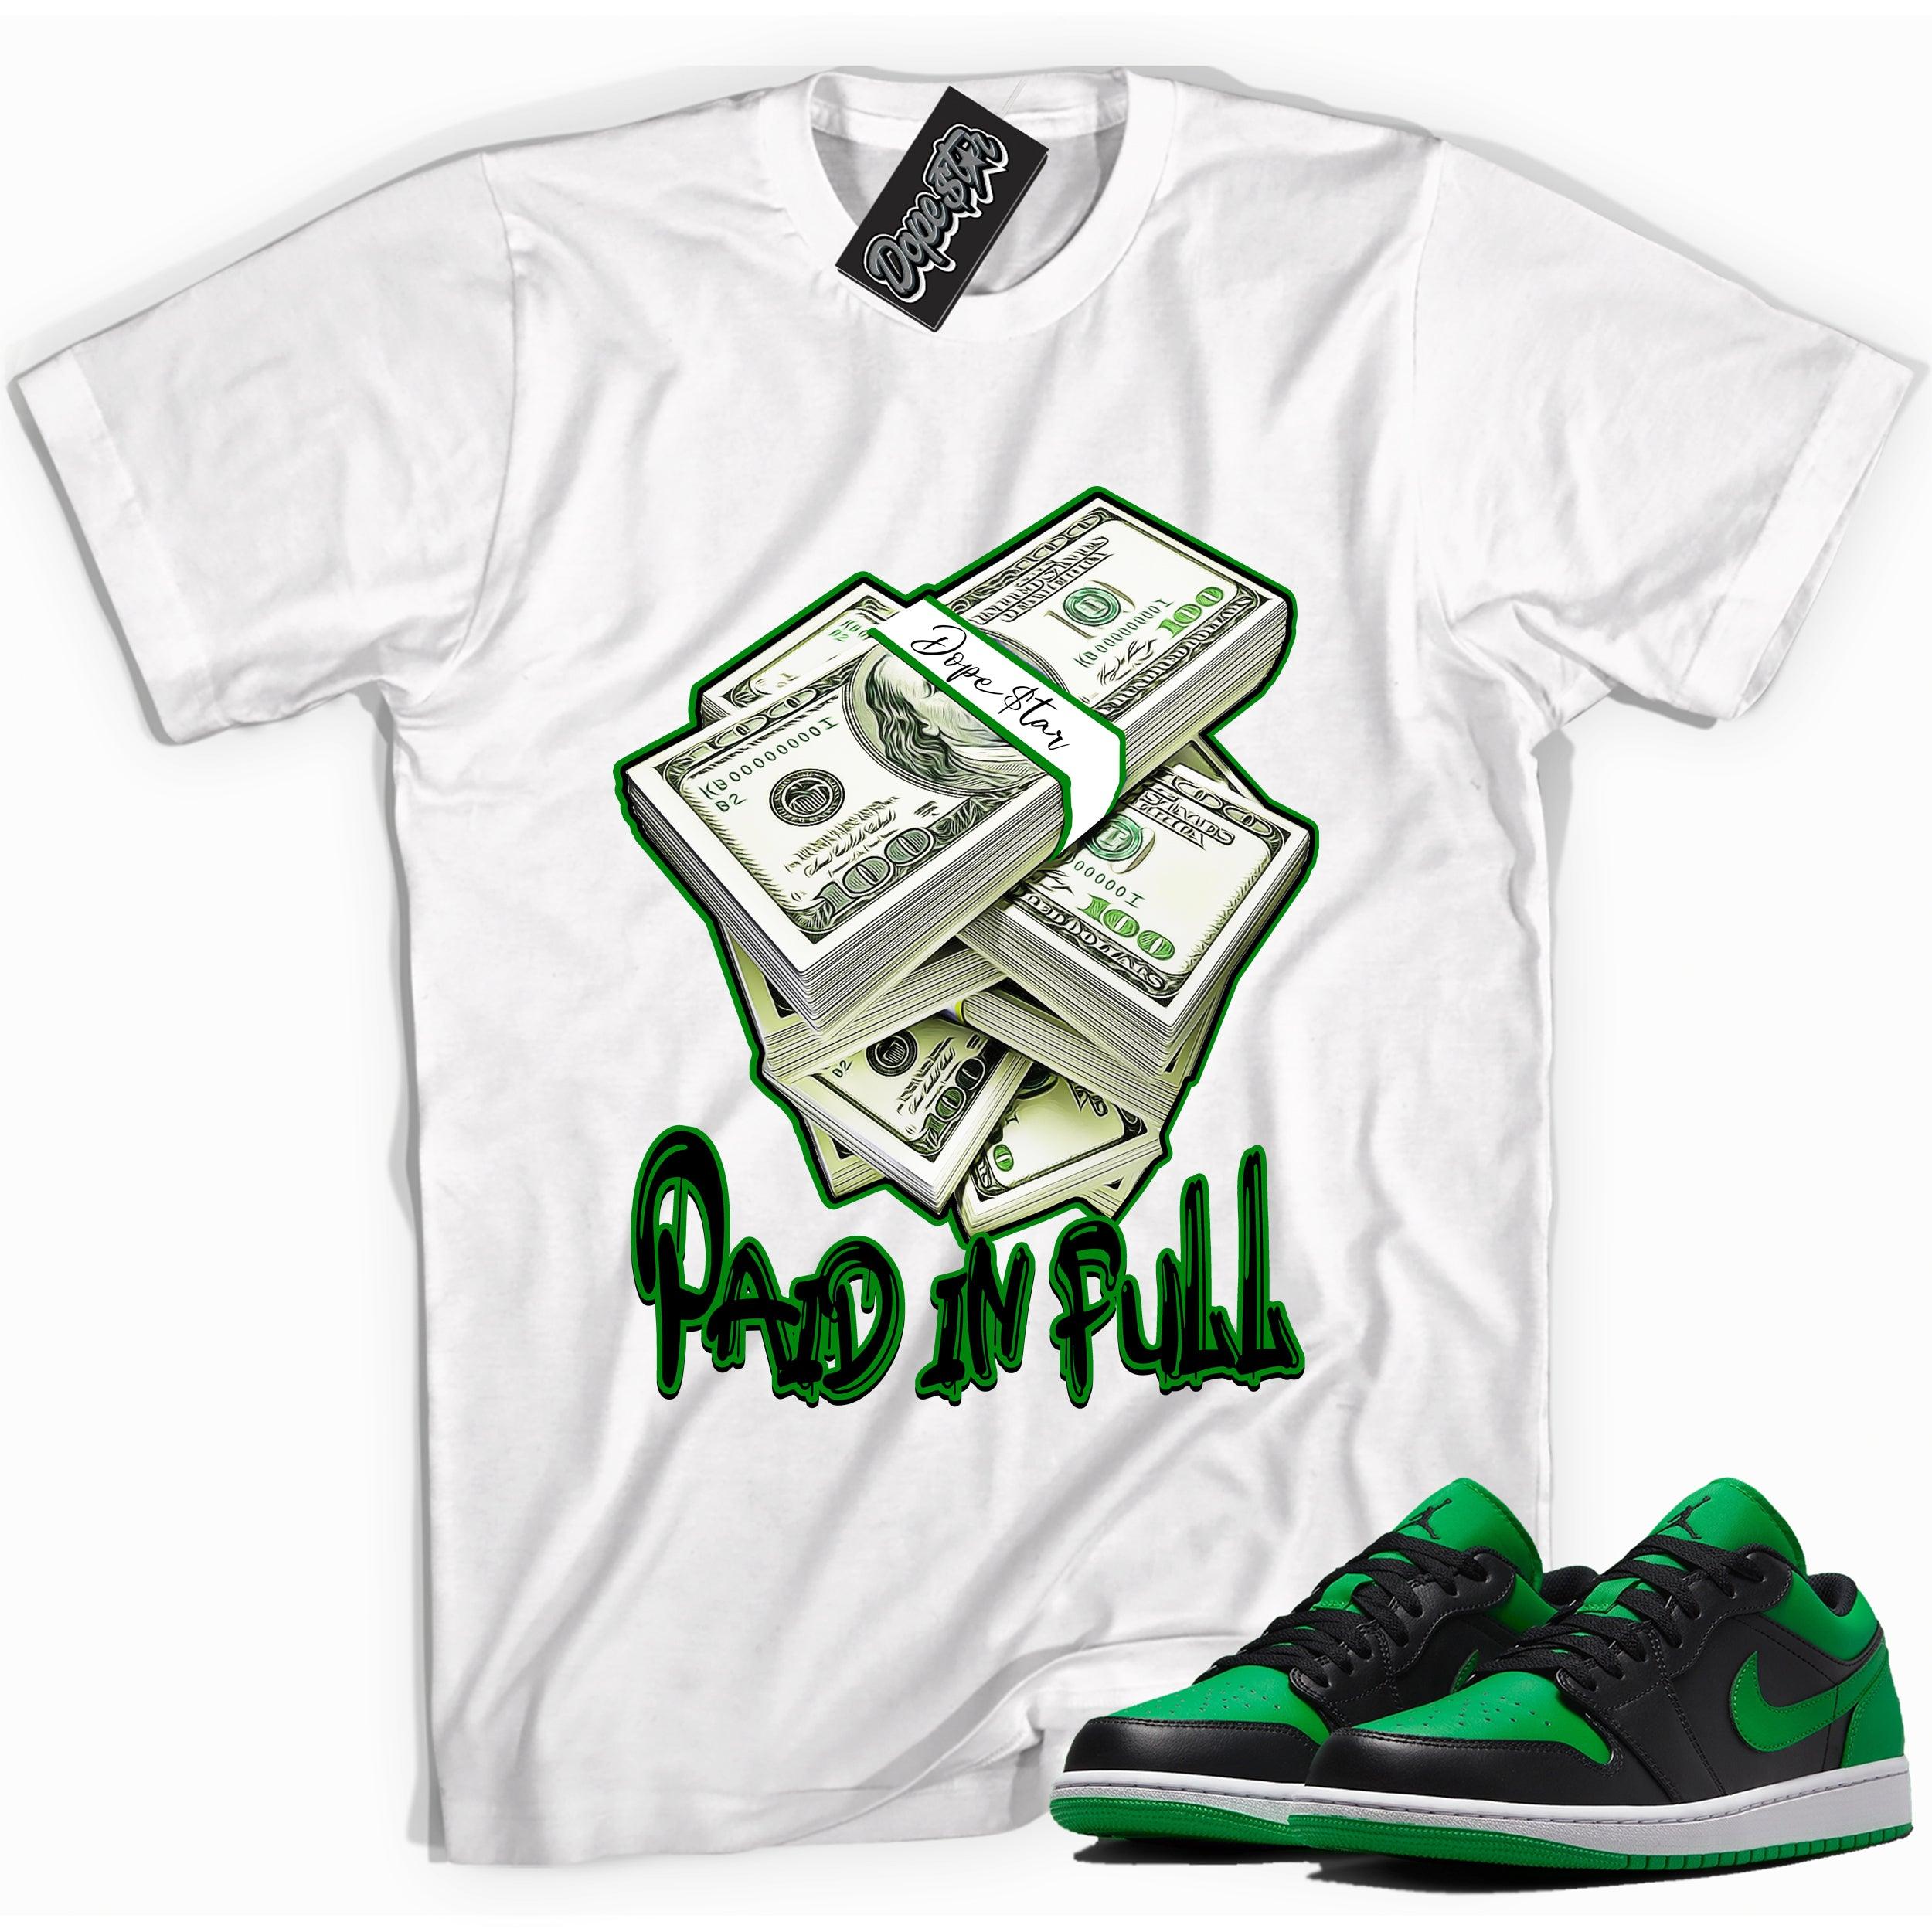 Cool white graphic tee with 'Paid In Full' print, that perfectly matches Air Jordan 1 Low Lucky Green sneakers